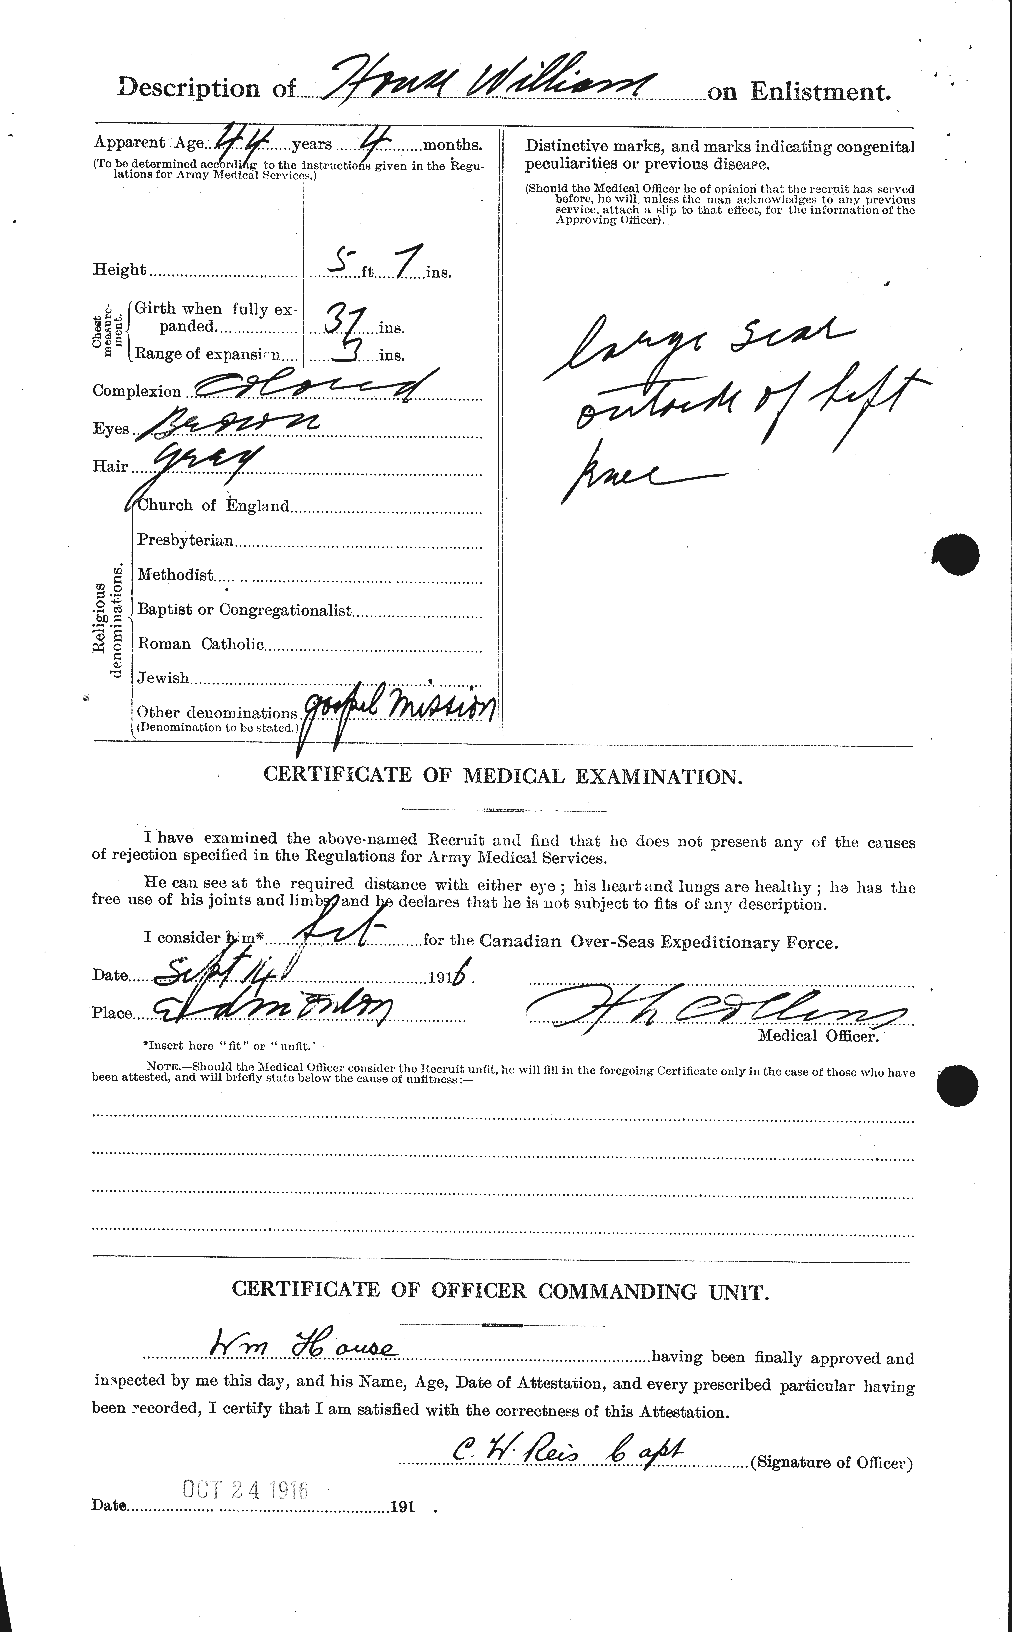 Personnel Records of the First World War - CEF 400589b